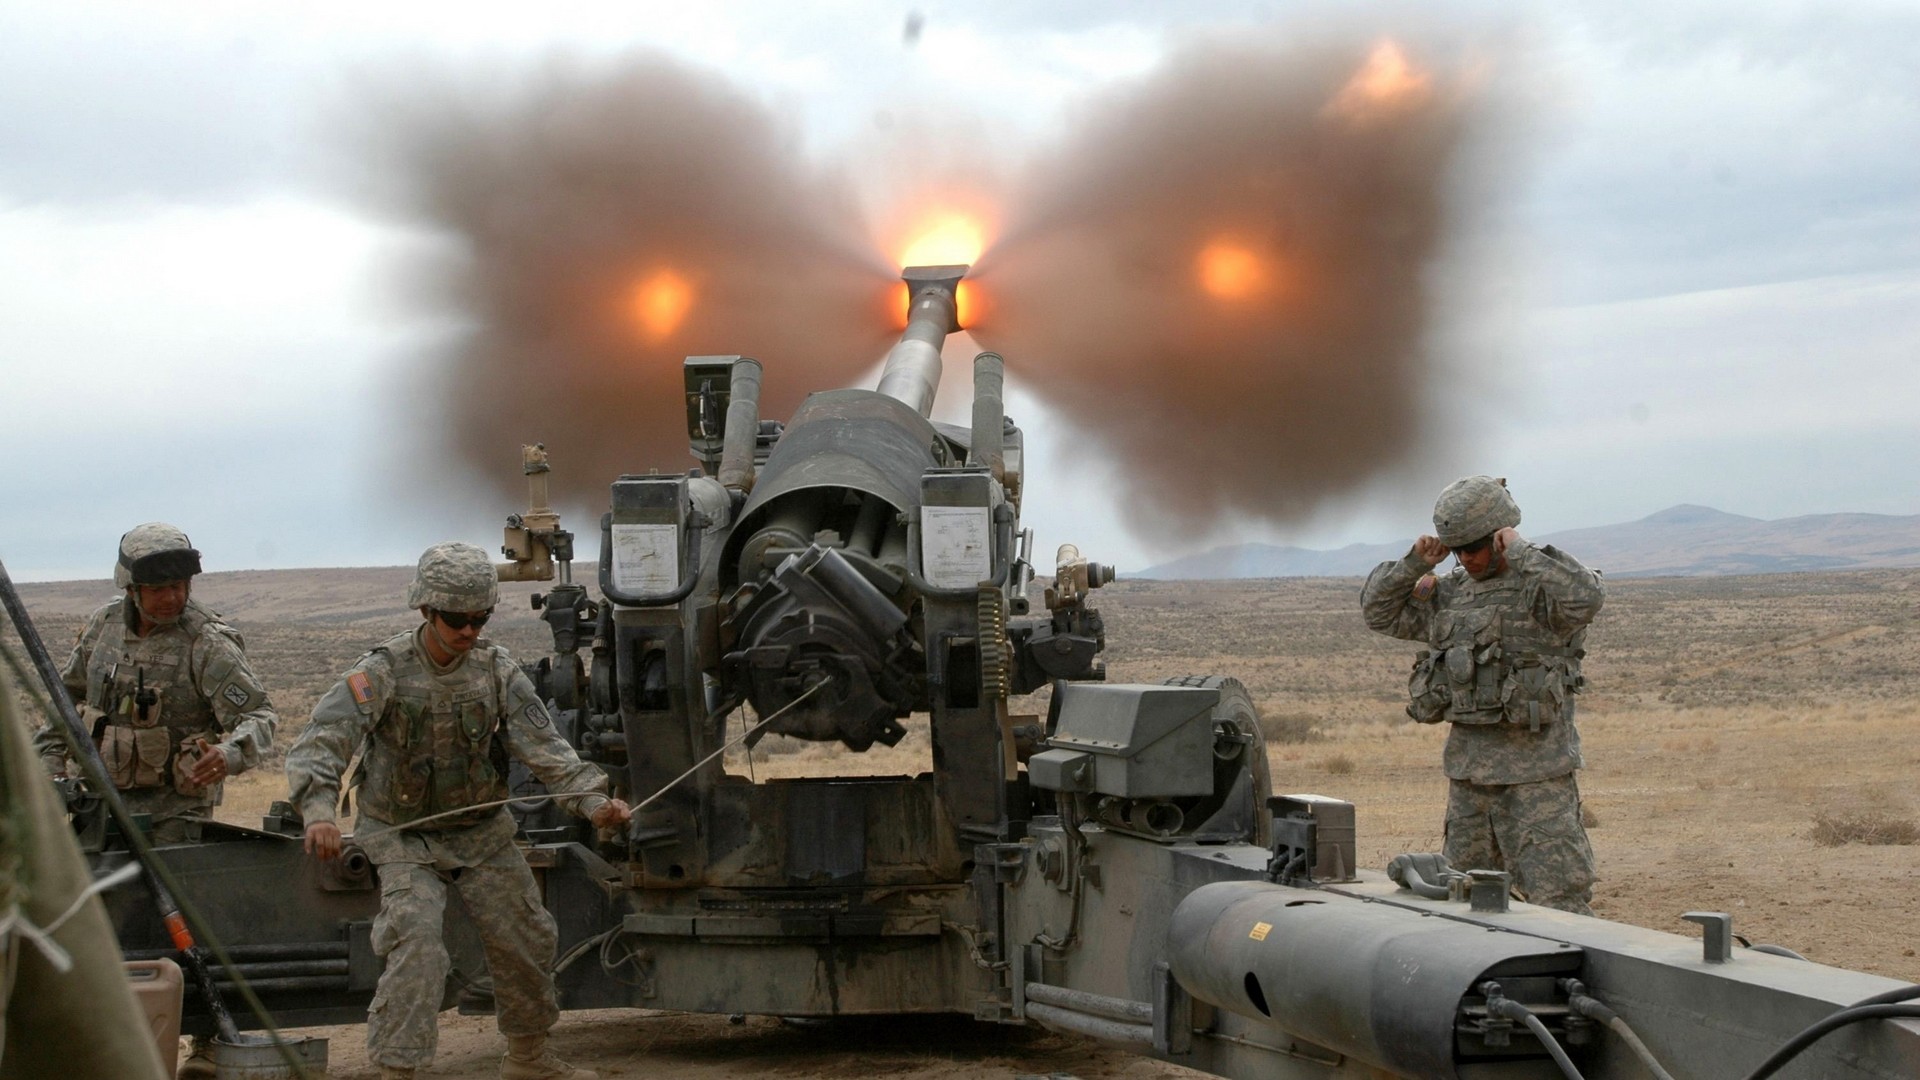 People 1920x1080 Howitzer artillery military soldier United States Army